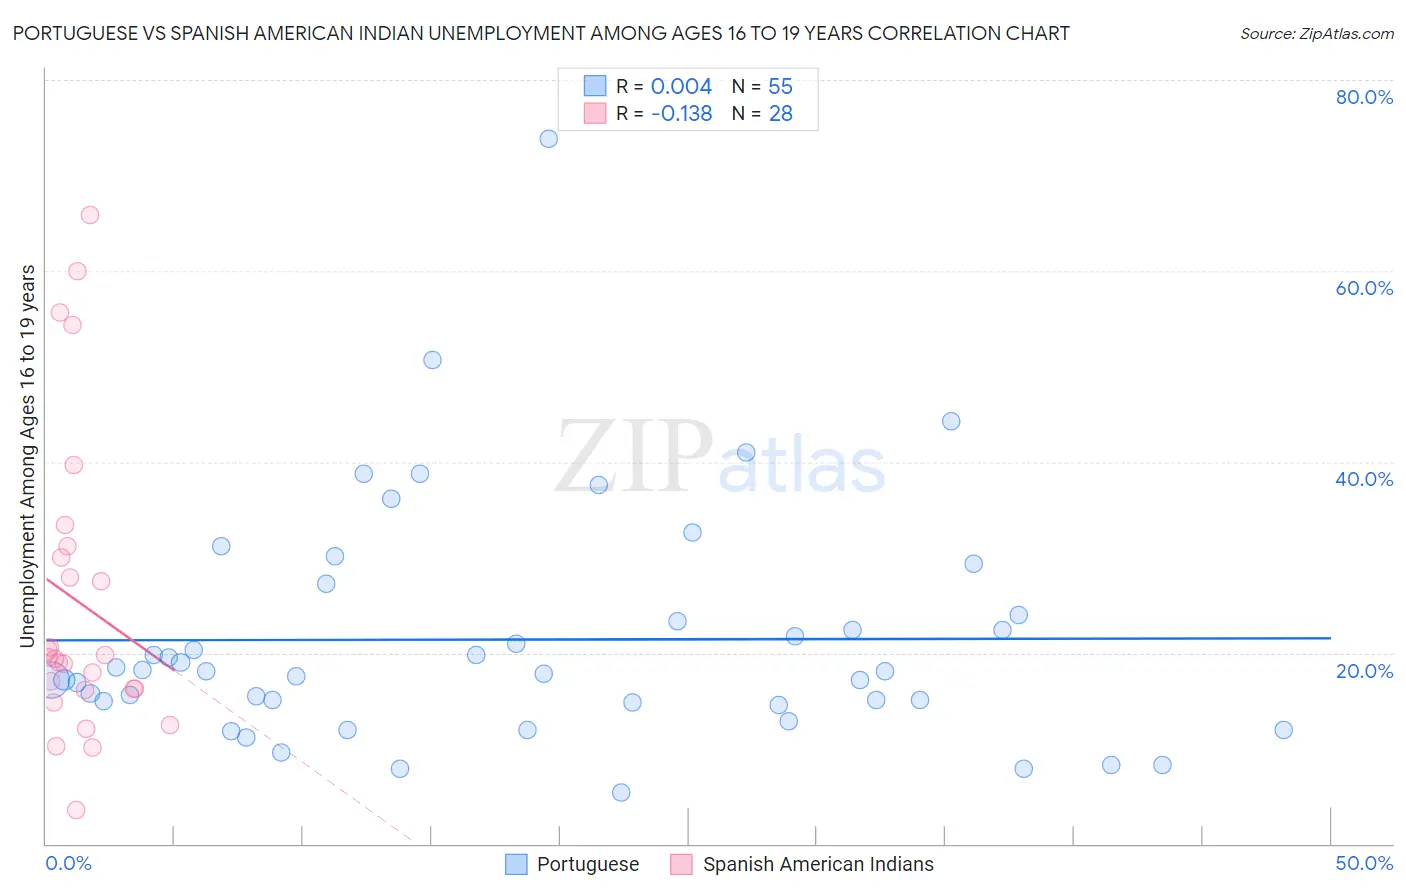 Portuguese vs Spanish American Indian Unemployment Among Ages 16 to 19 years